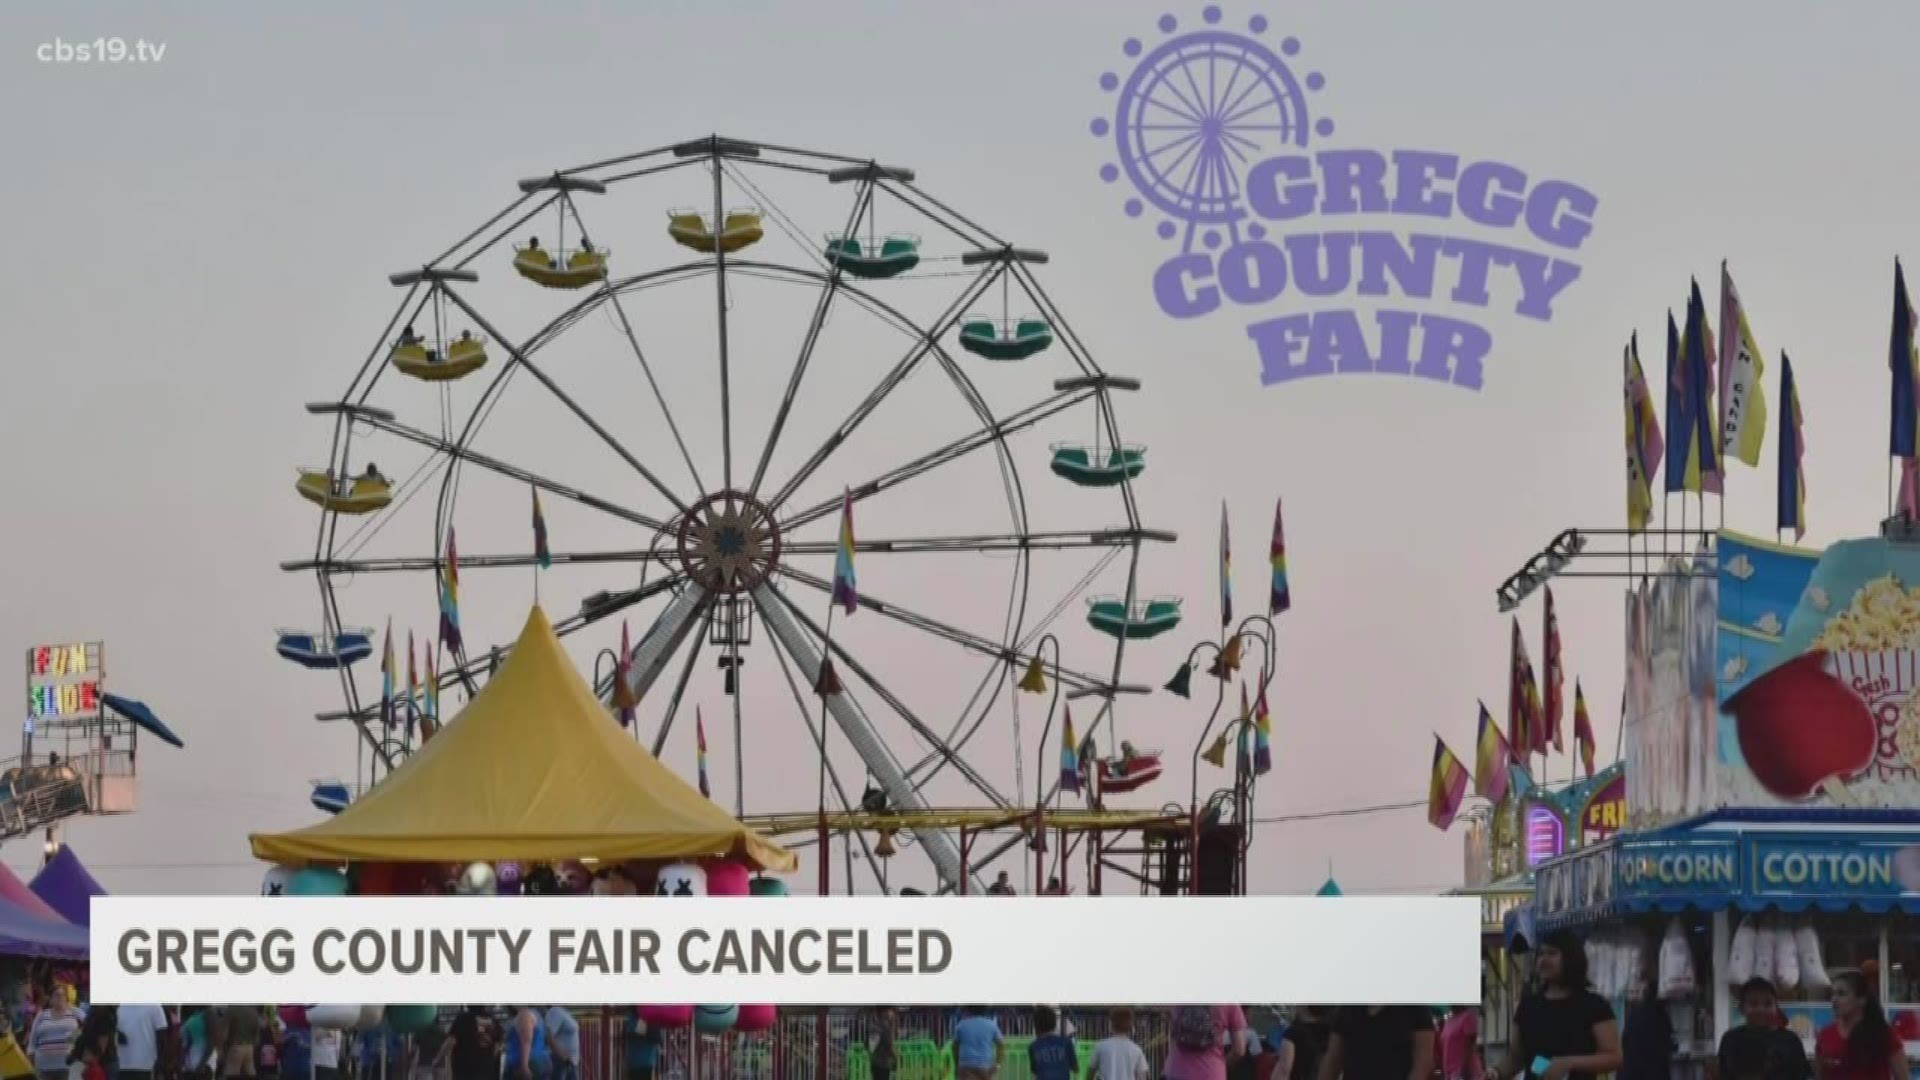 The decision was made Sunday to cancel the fair by the City of Longview.